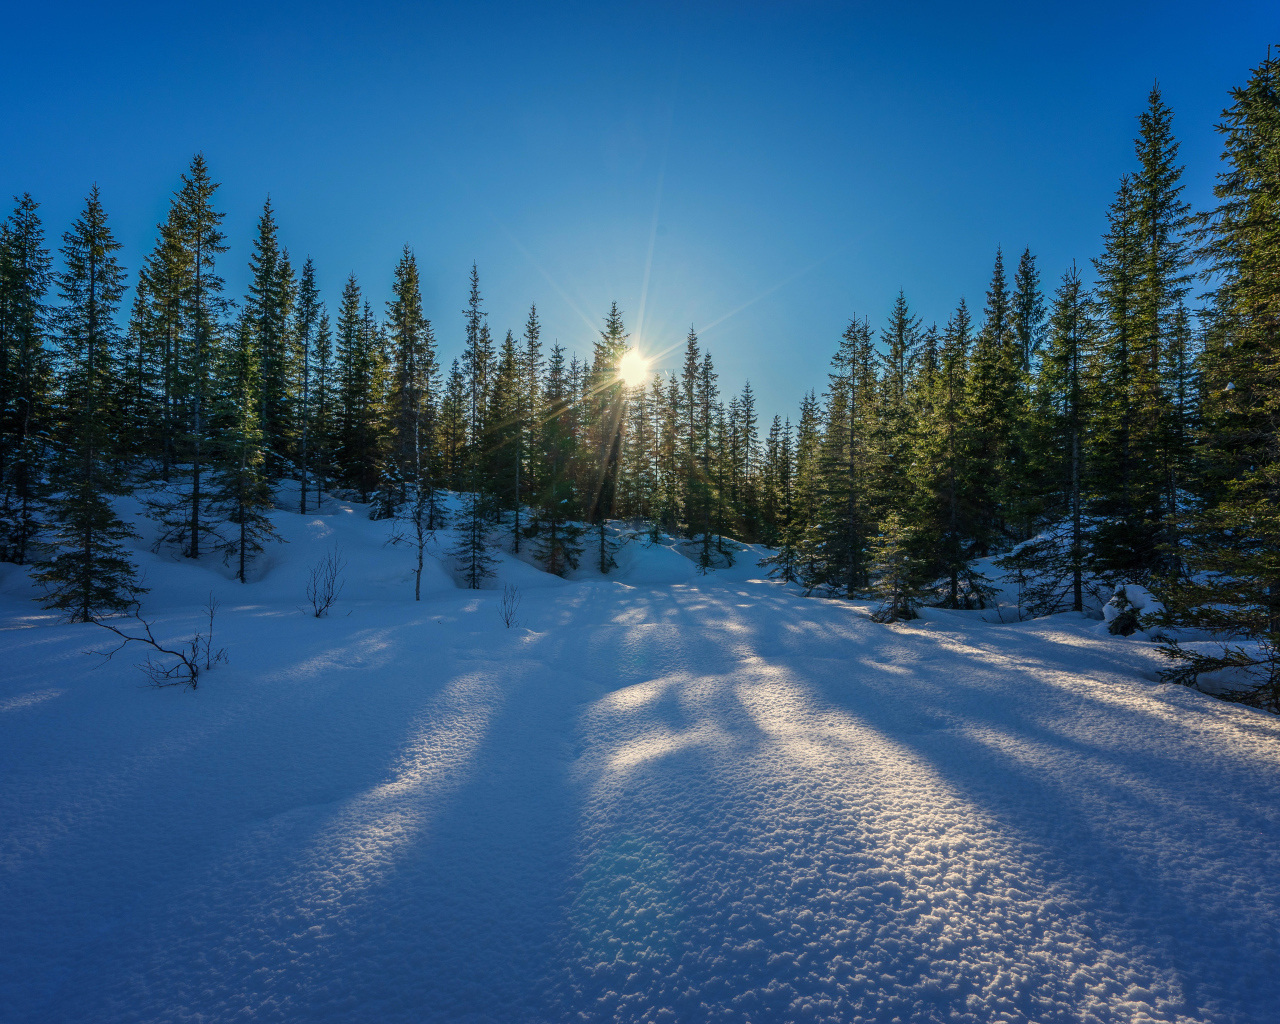 The sun breaks through the green spruces in the forest in winter